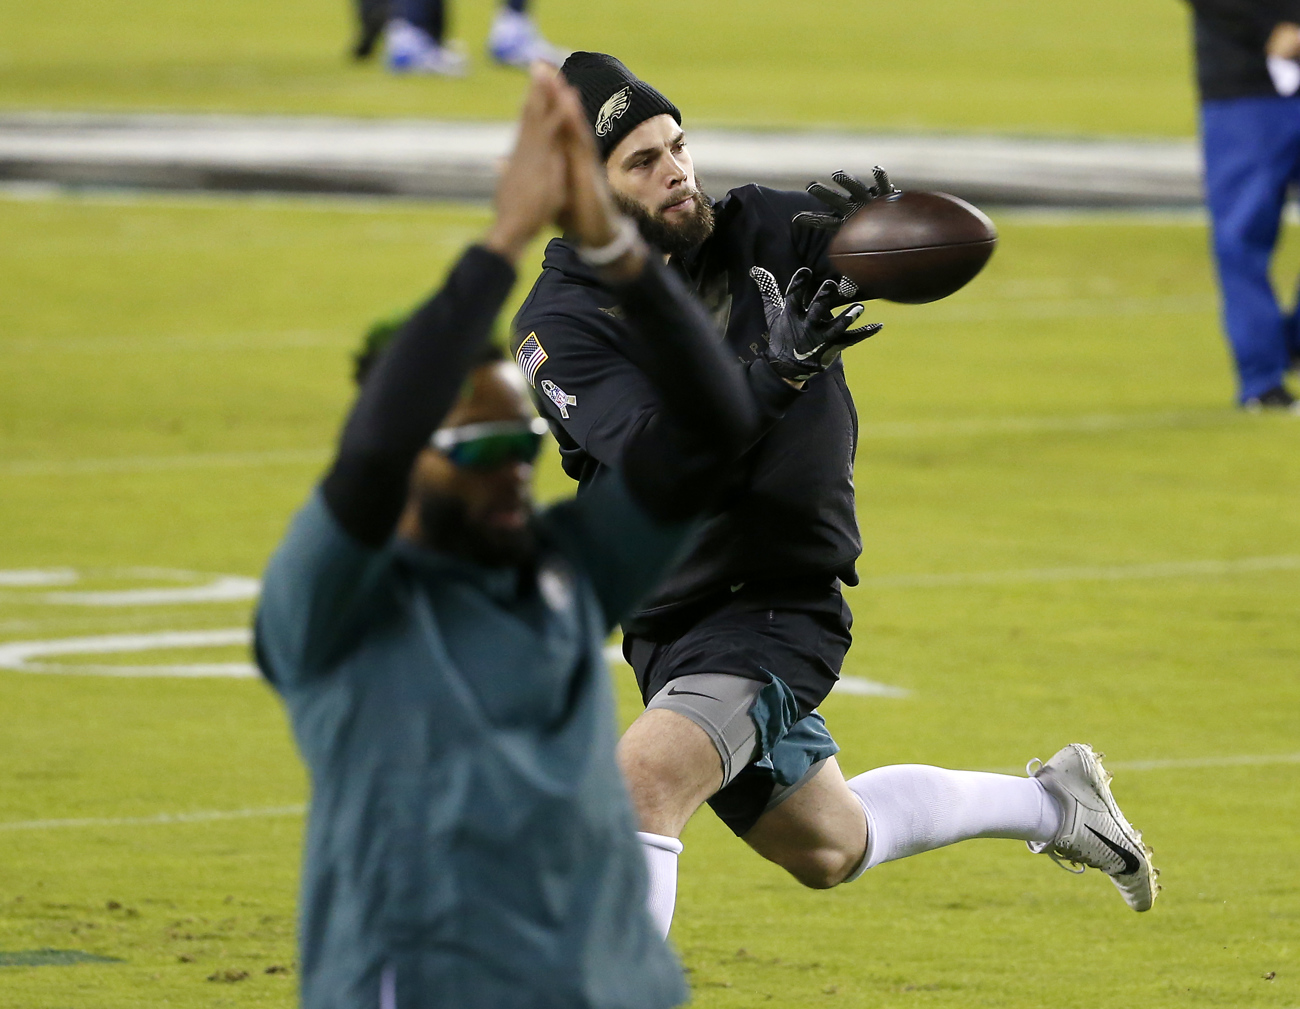 What's up with Eagles' Jake Elliott? Dave Fipp weighs in on